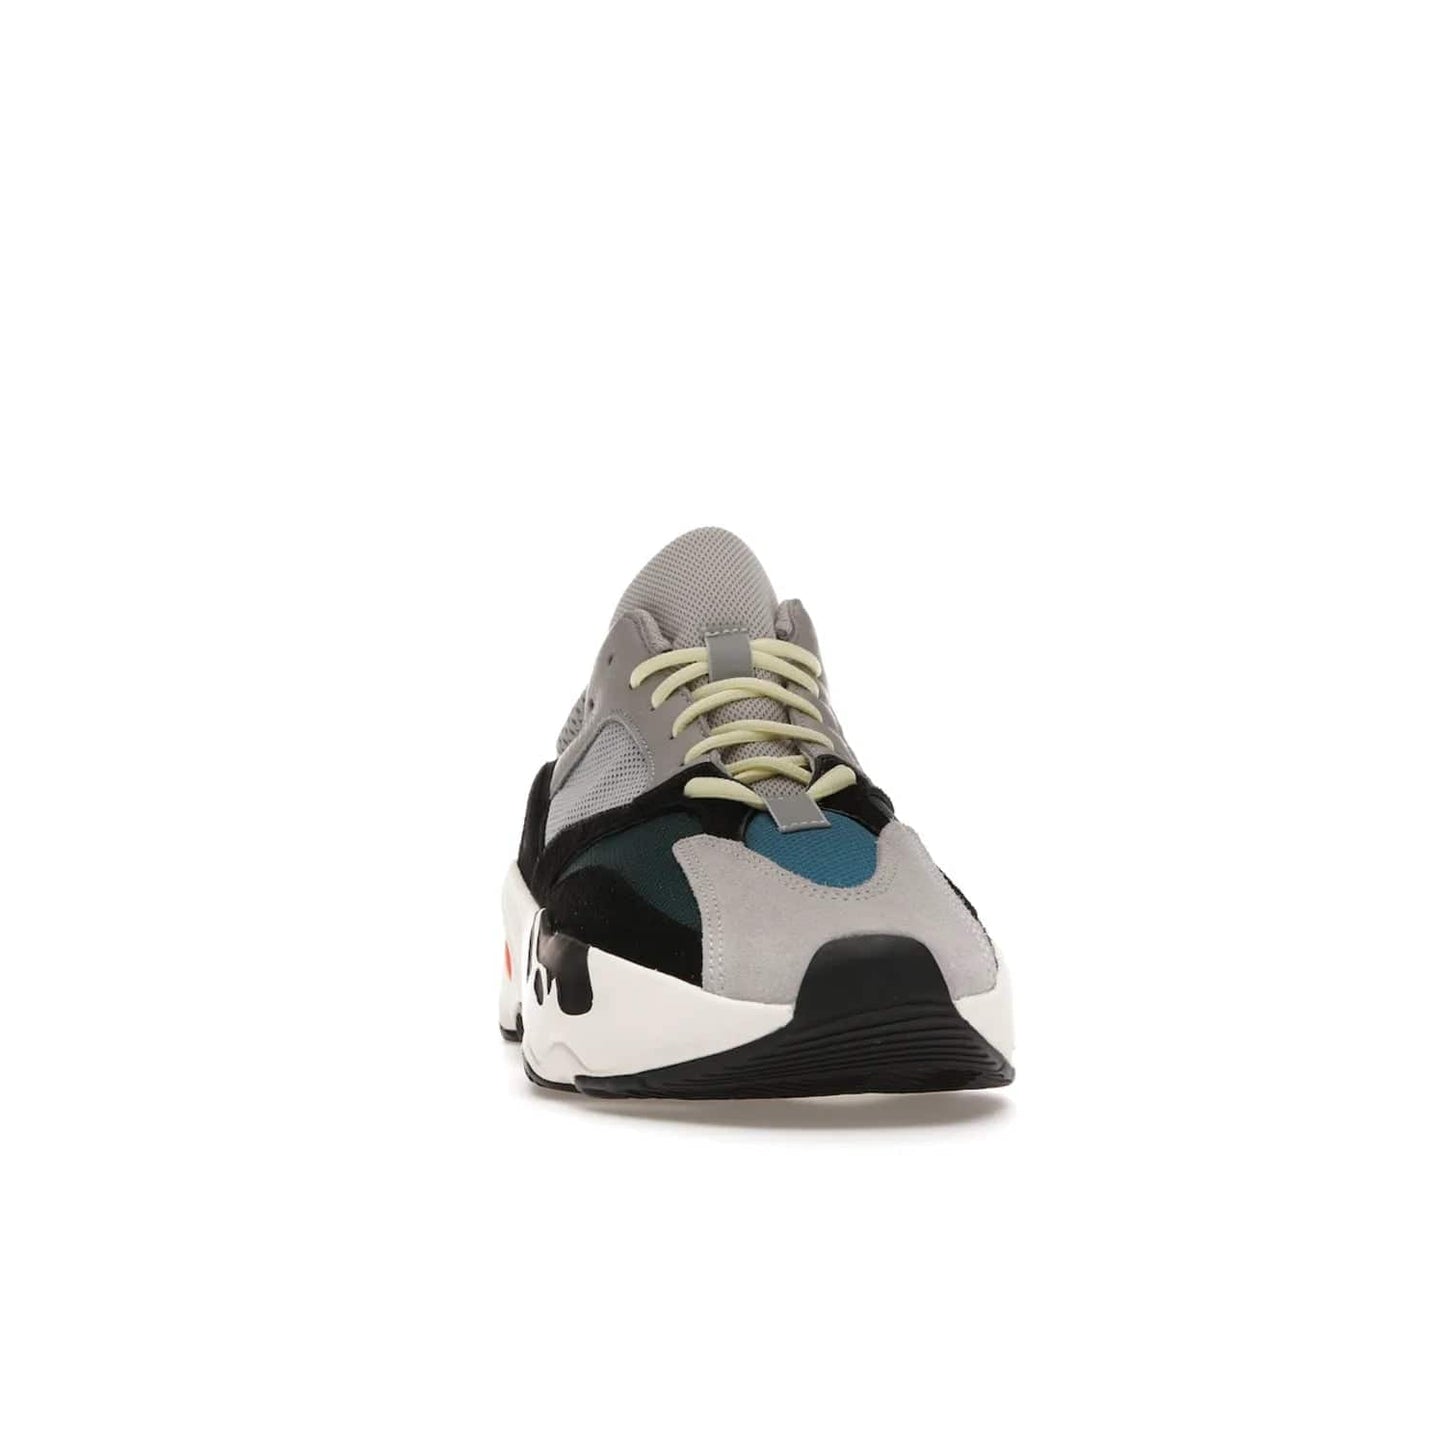 adidas Yeezy Boost 700 Wave Runner - Image 9 - Only at www.BallersClubKickz.com - Shop the iconic adidas Yeezy Boost 700 Wave Runner. Featuring grey mesh and leather upper, black suede overlays, teal mesh underlays, and signature Boost sole. Be bold & make a statement.